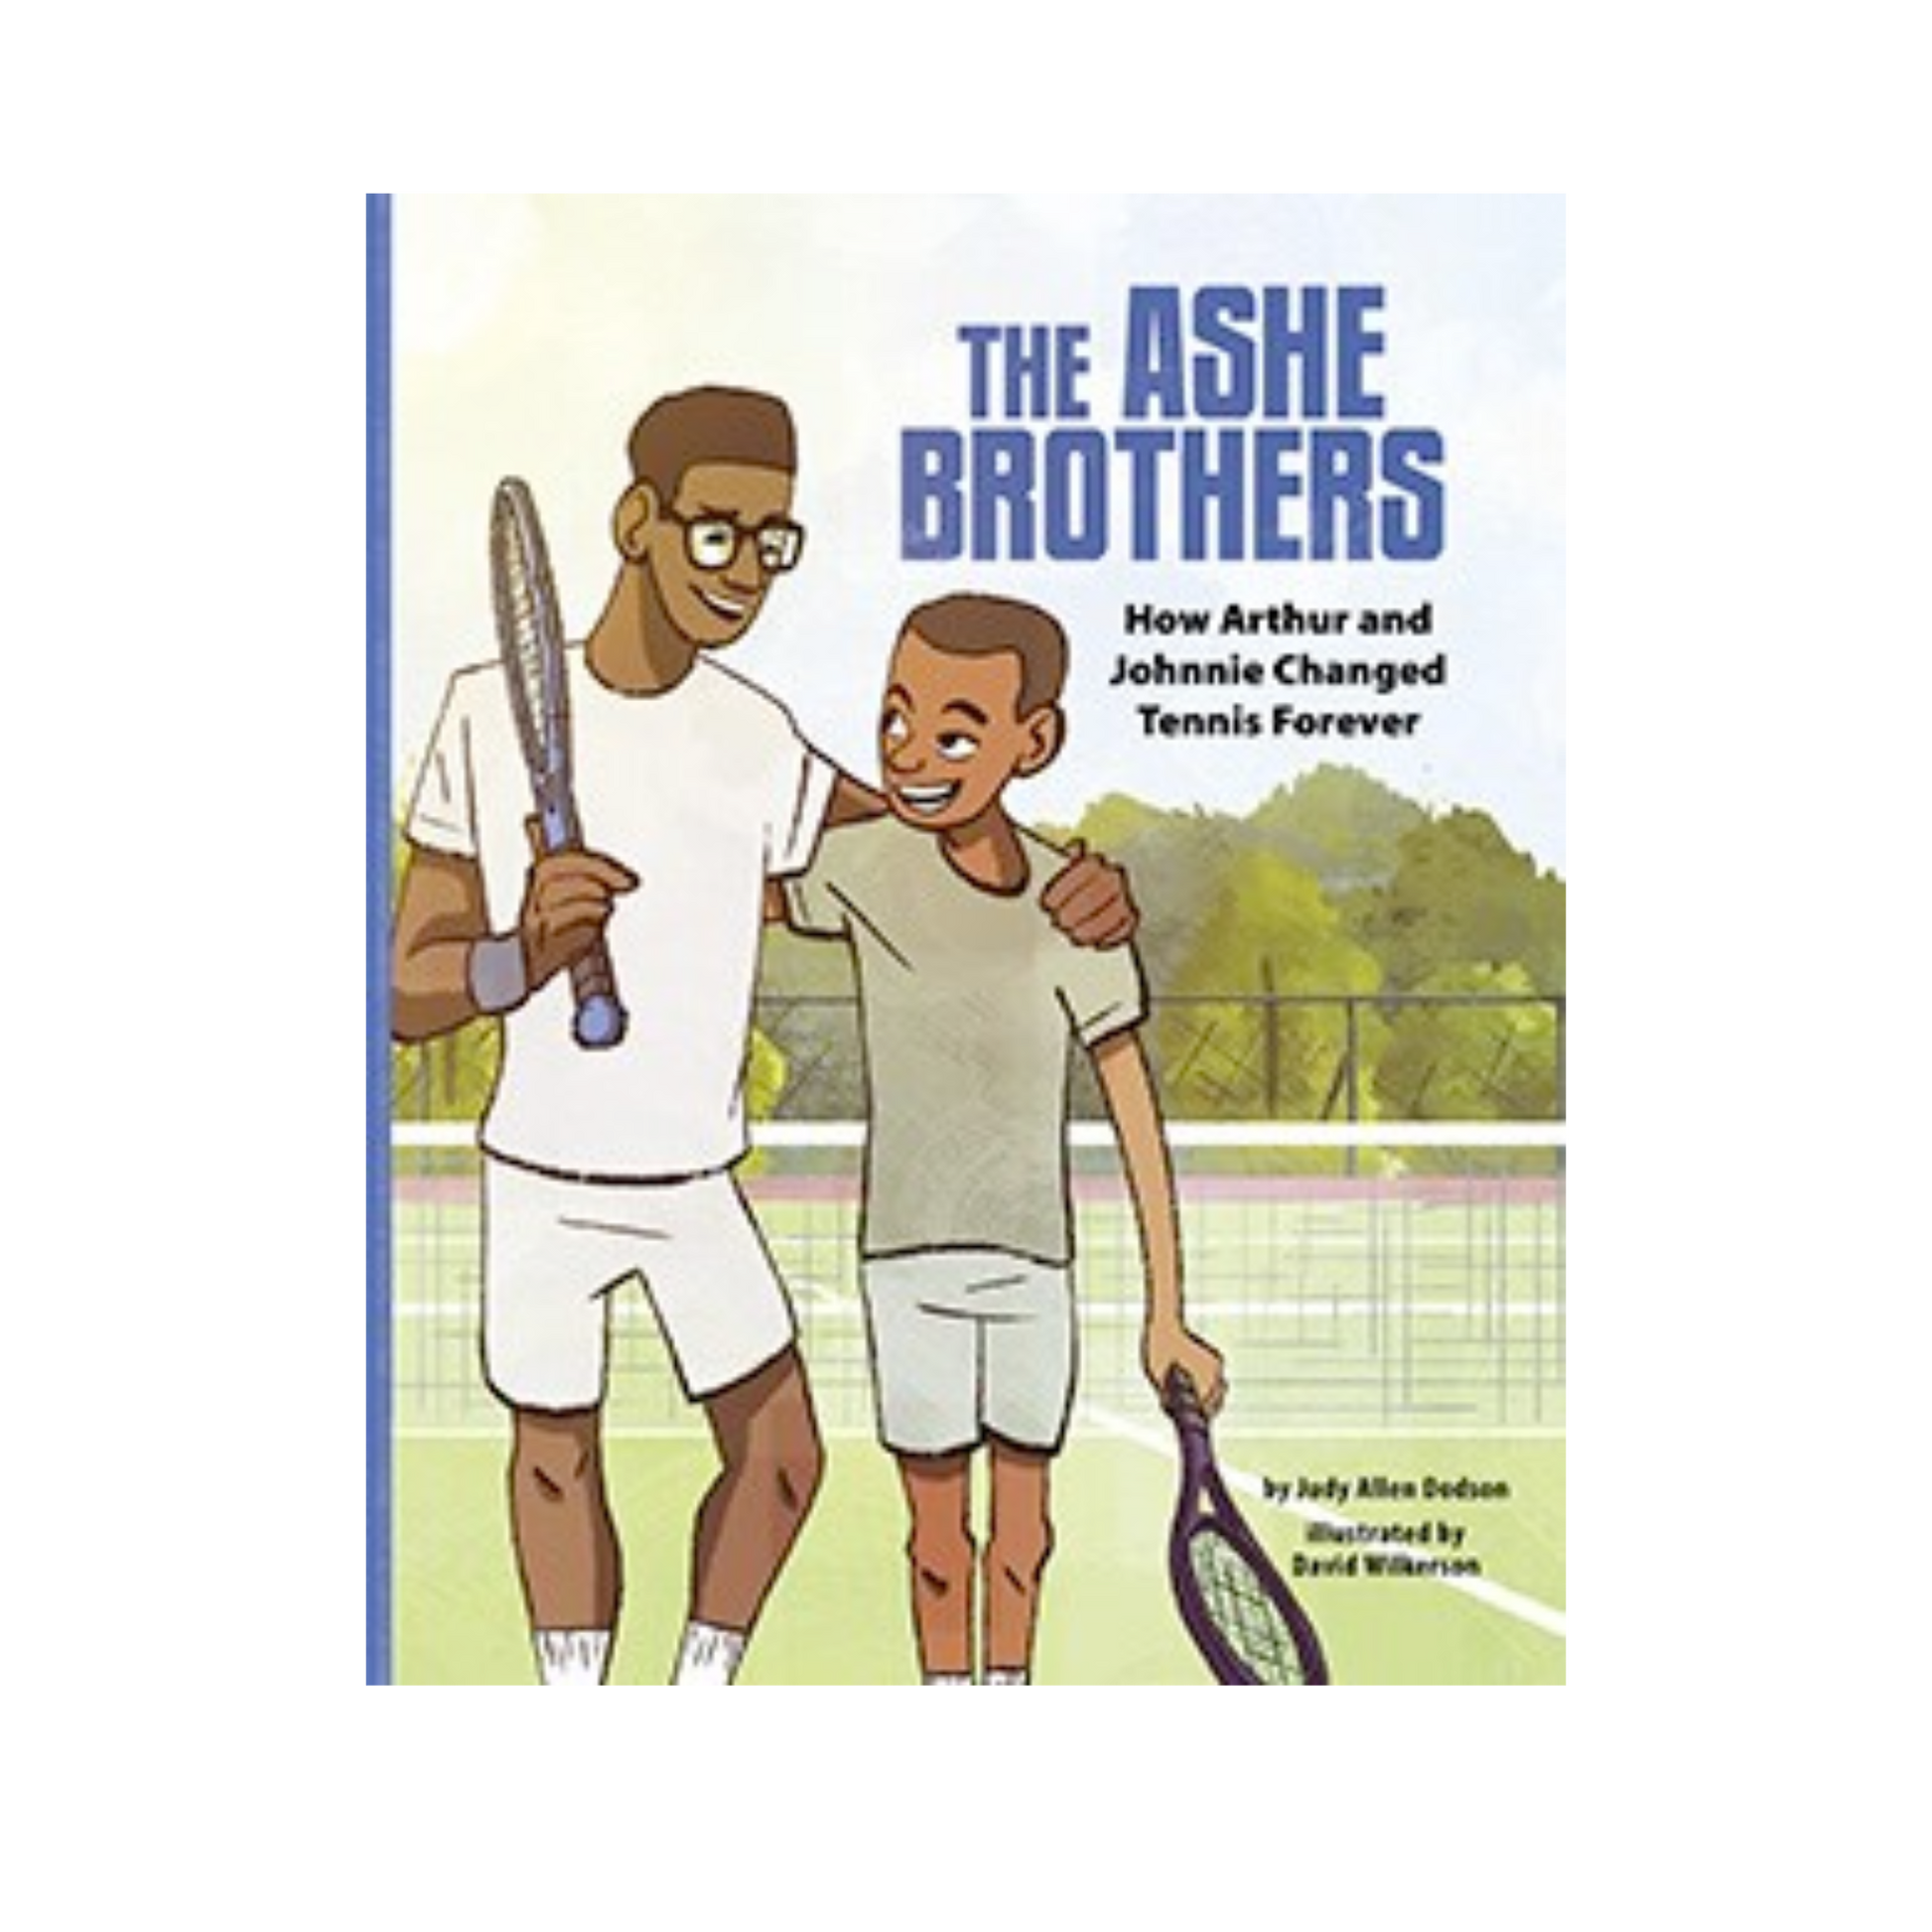 the ashe brothers judy allen dodson